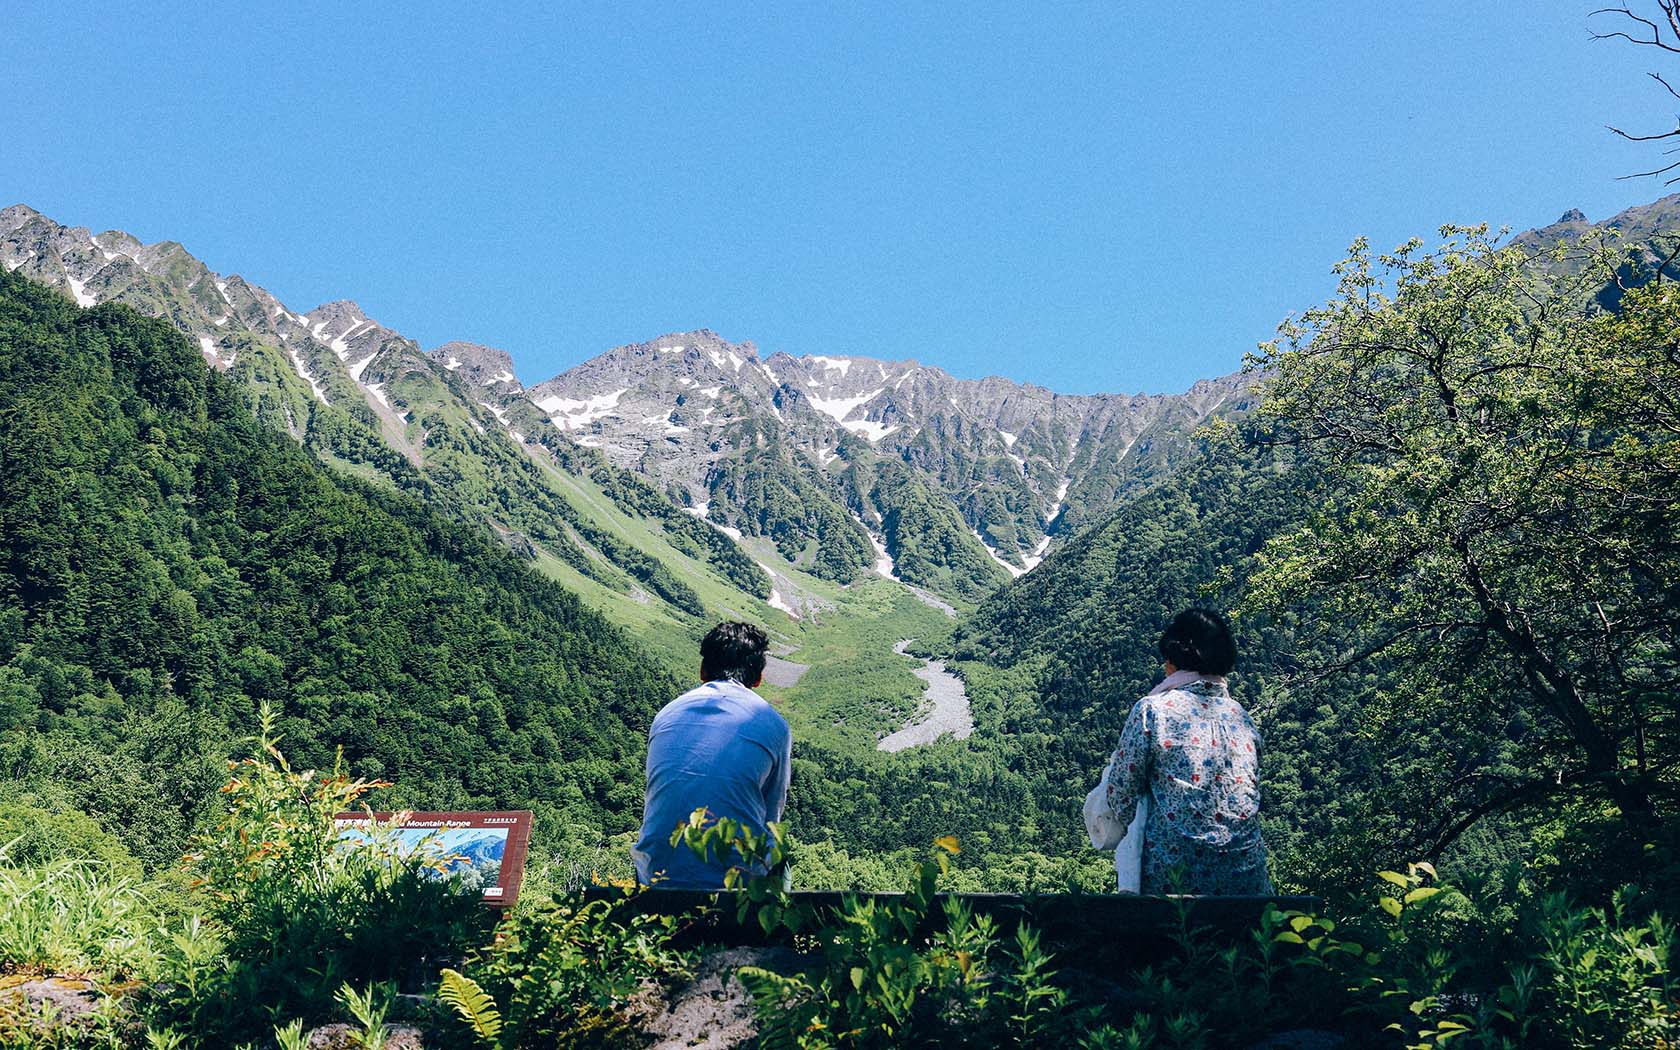 Kamikochi Makes A Case For Visiting The Japanese Alps In Summer